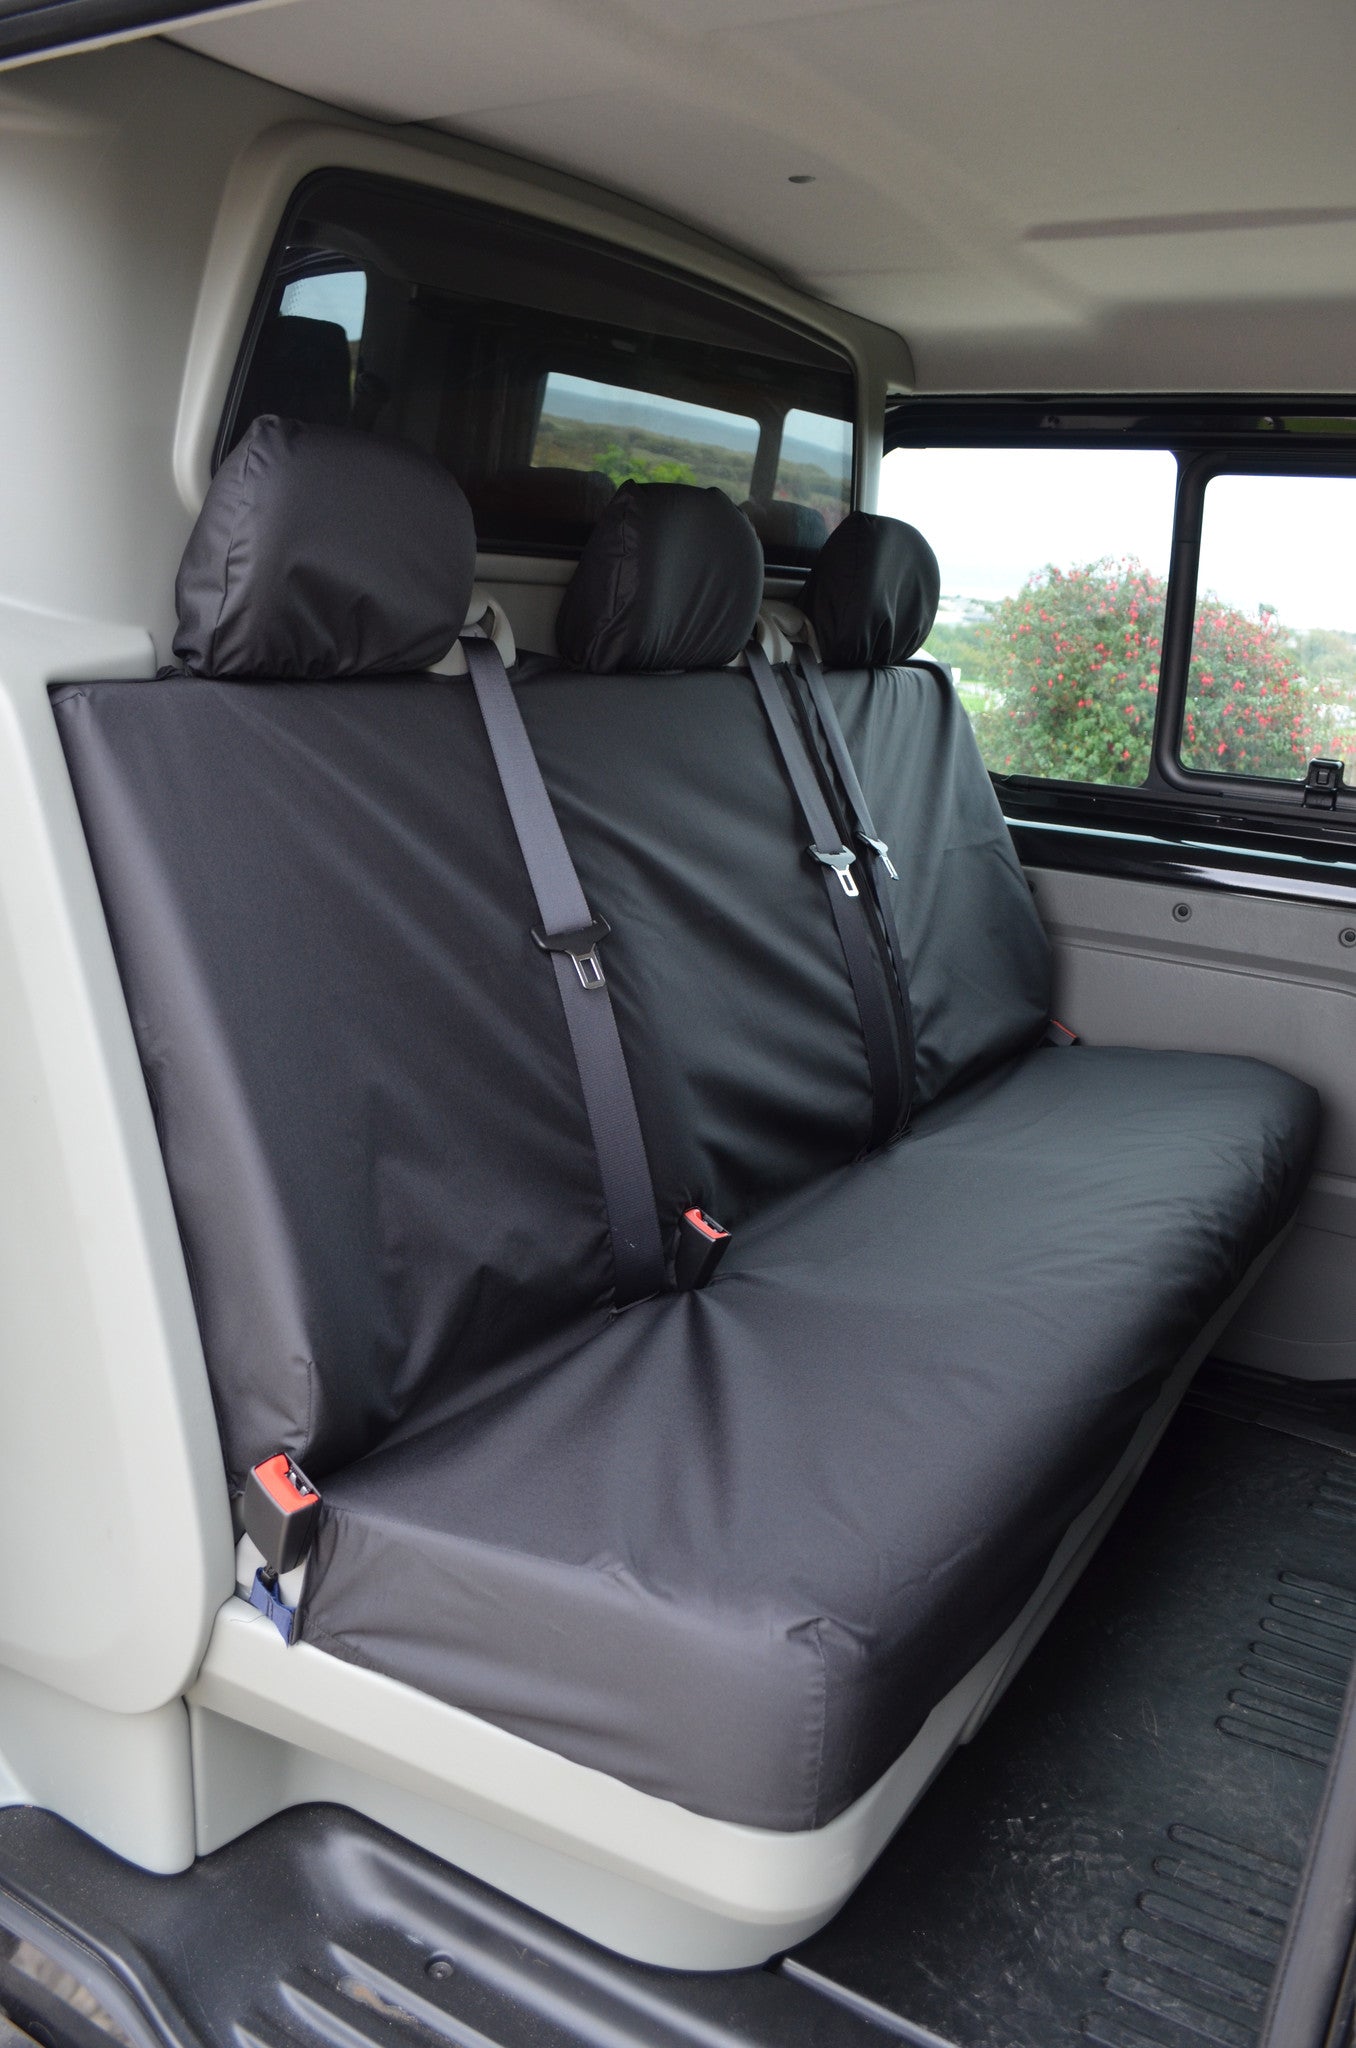 Renault Trafic Crew Cab 2006 - 2014 Rear Seat Covers Black Turtle Covers Ltd